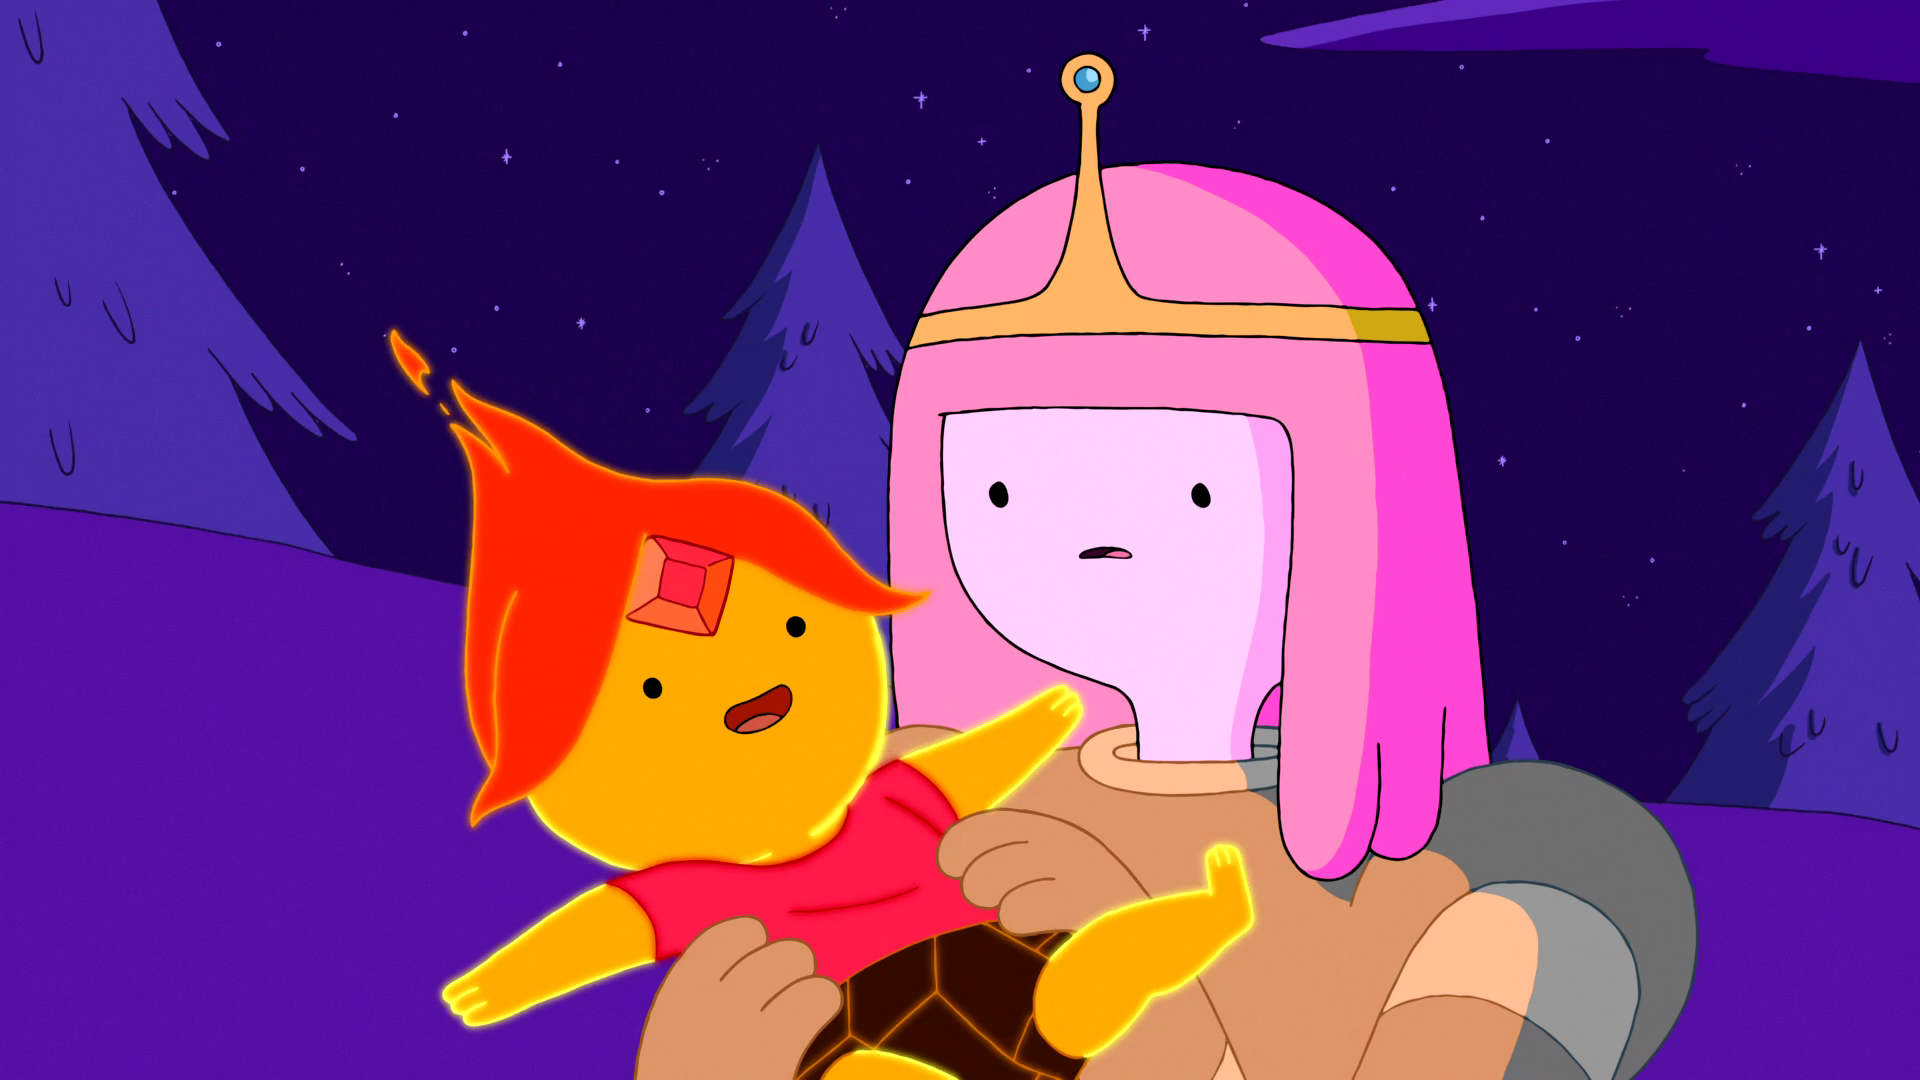 Image Of Princess Bubblegum S Rule By Science The Mary Sue.